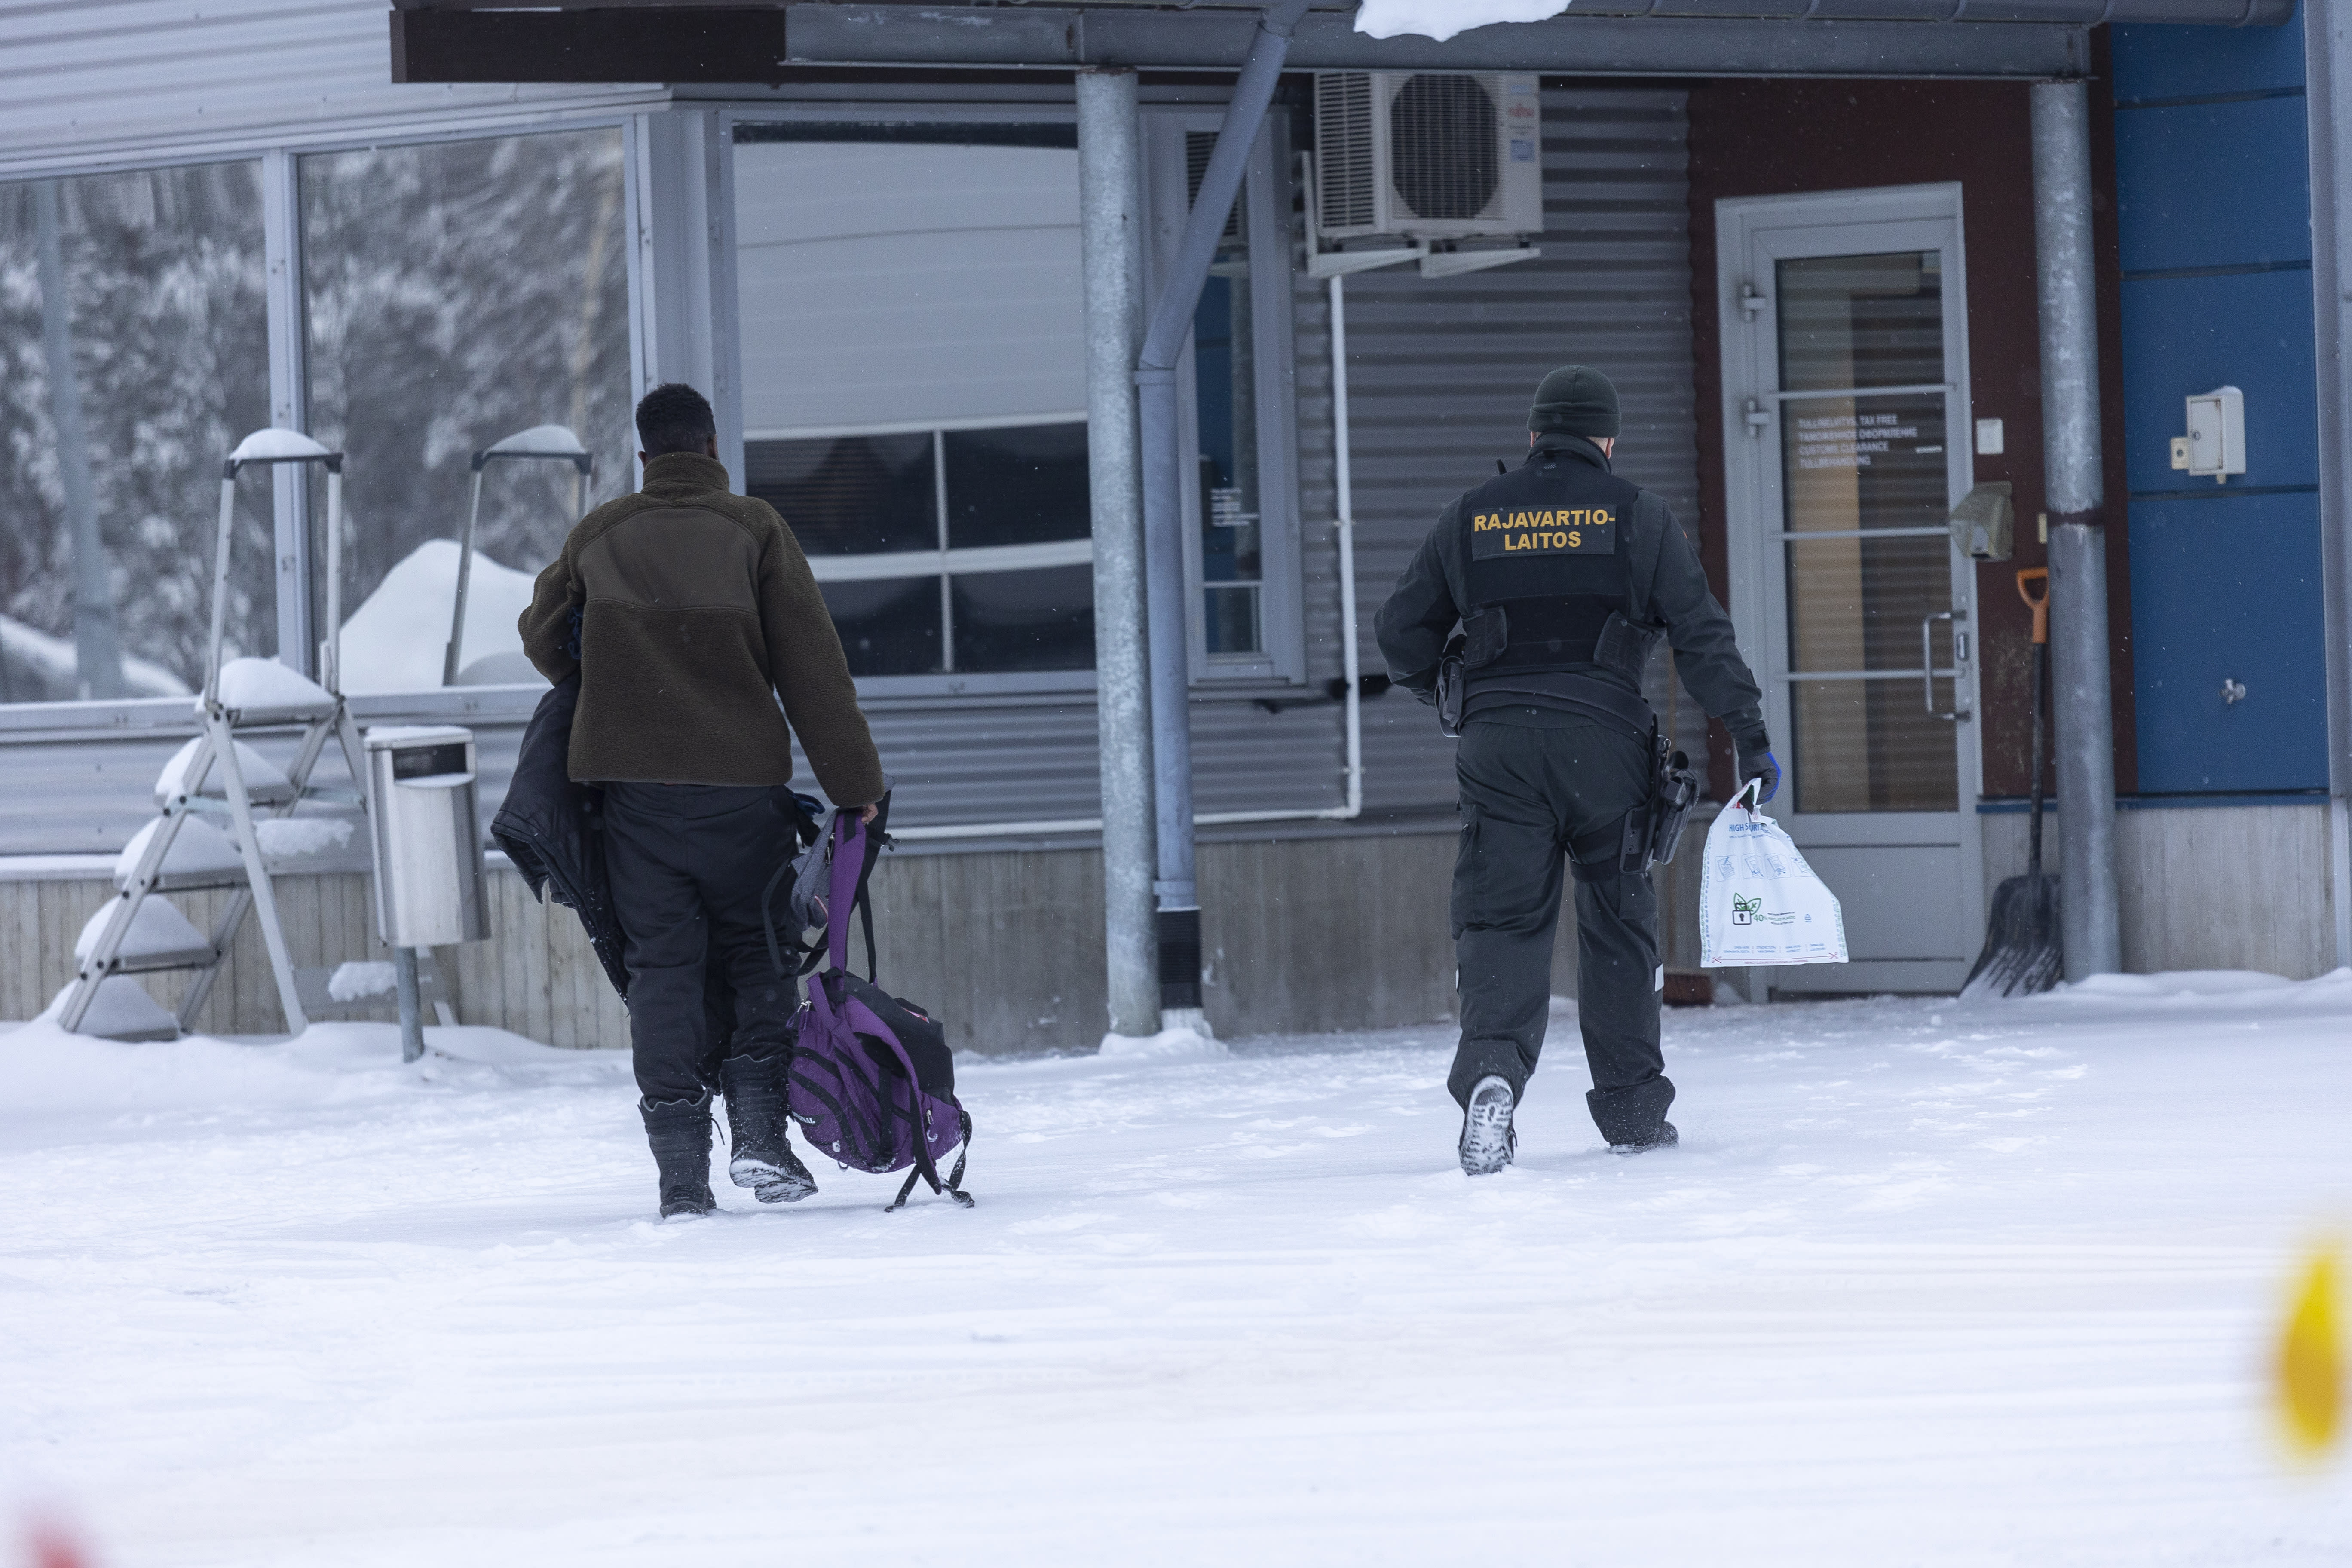 Finland suspects 1,000 asylum seekers of committing border crimes